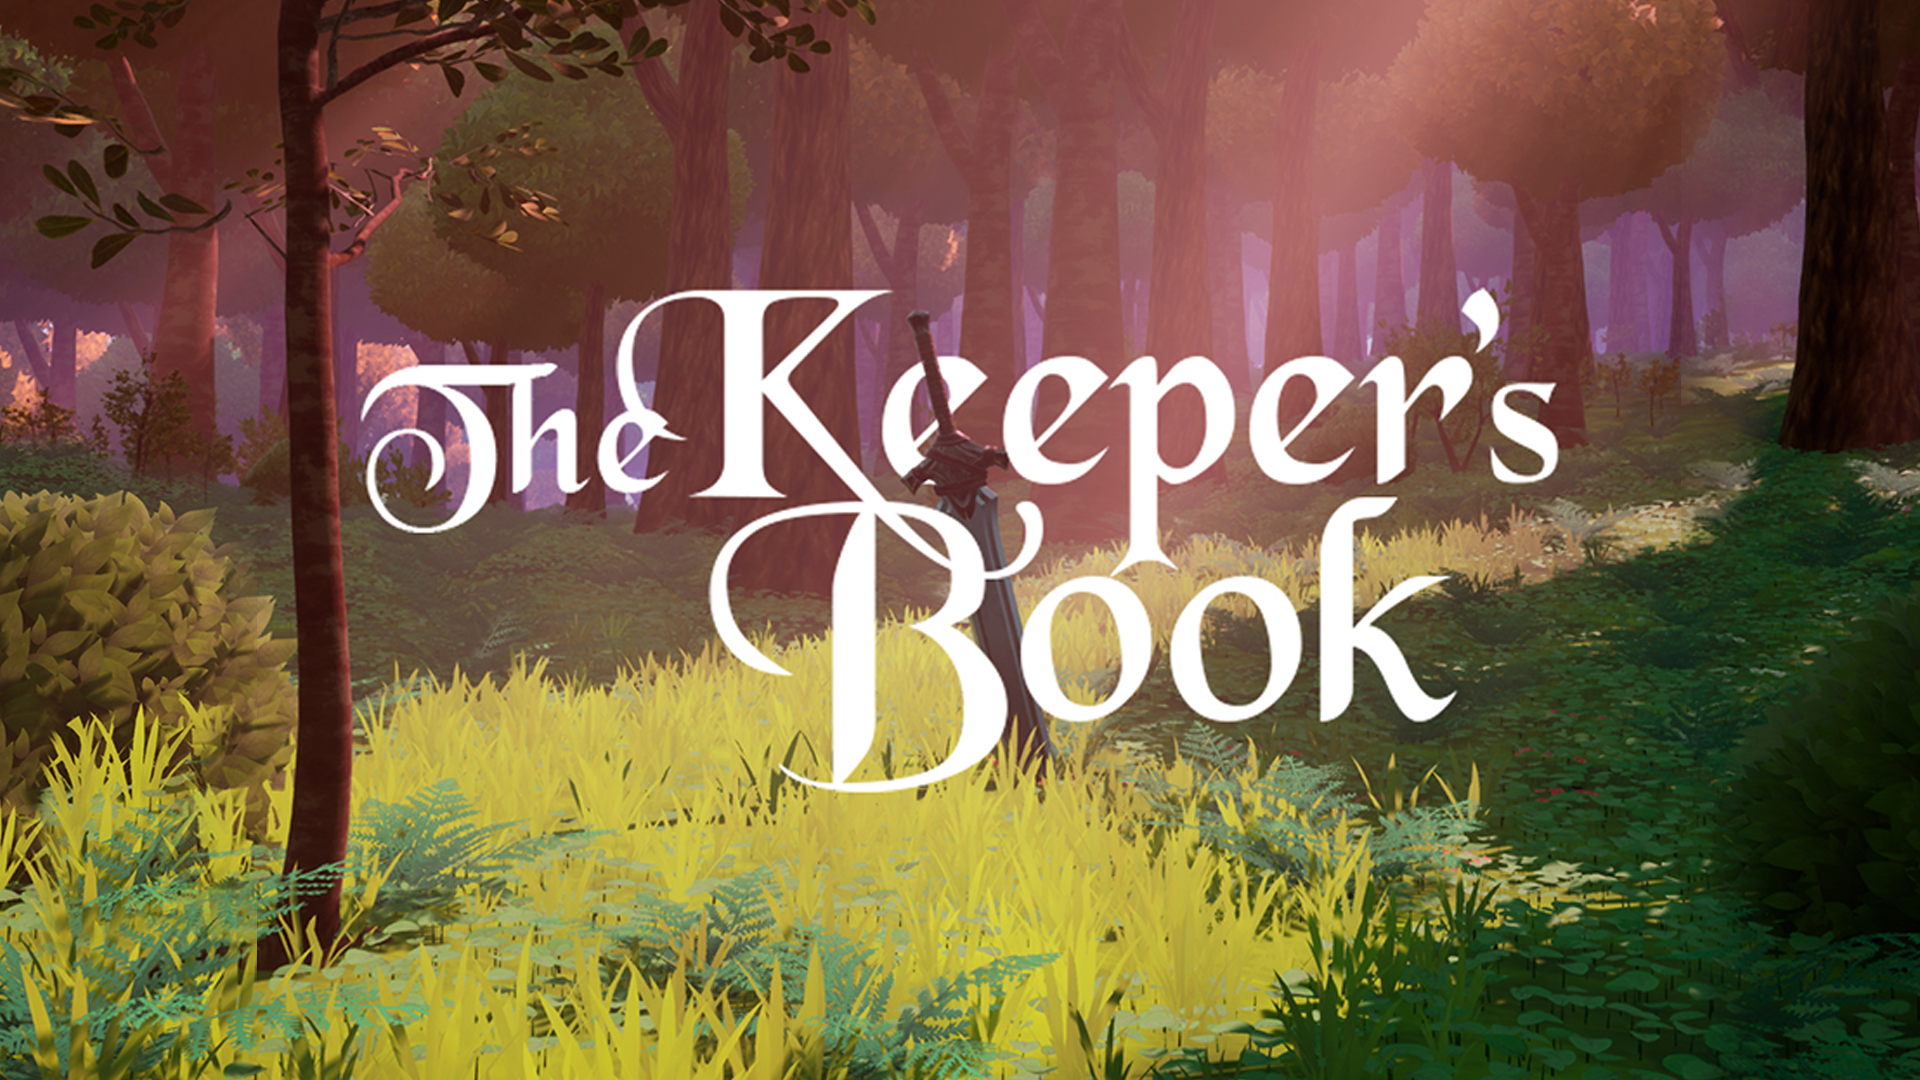 The Keeper's Book - The Trials